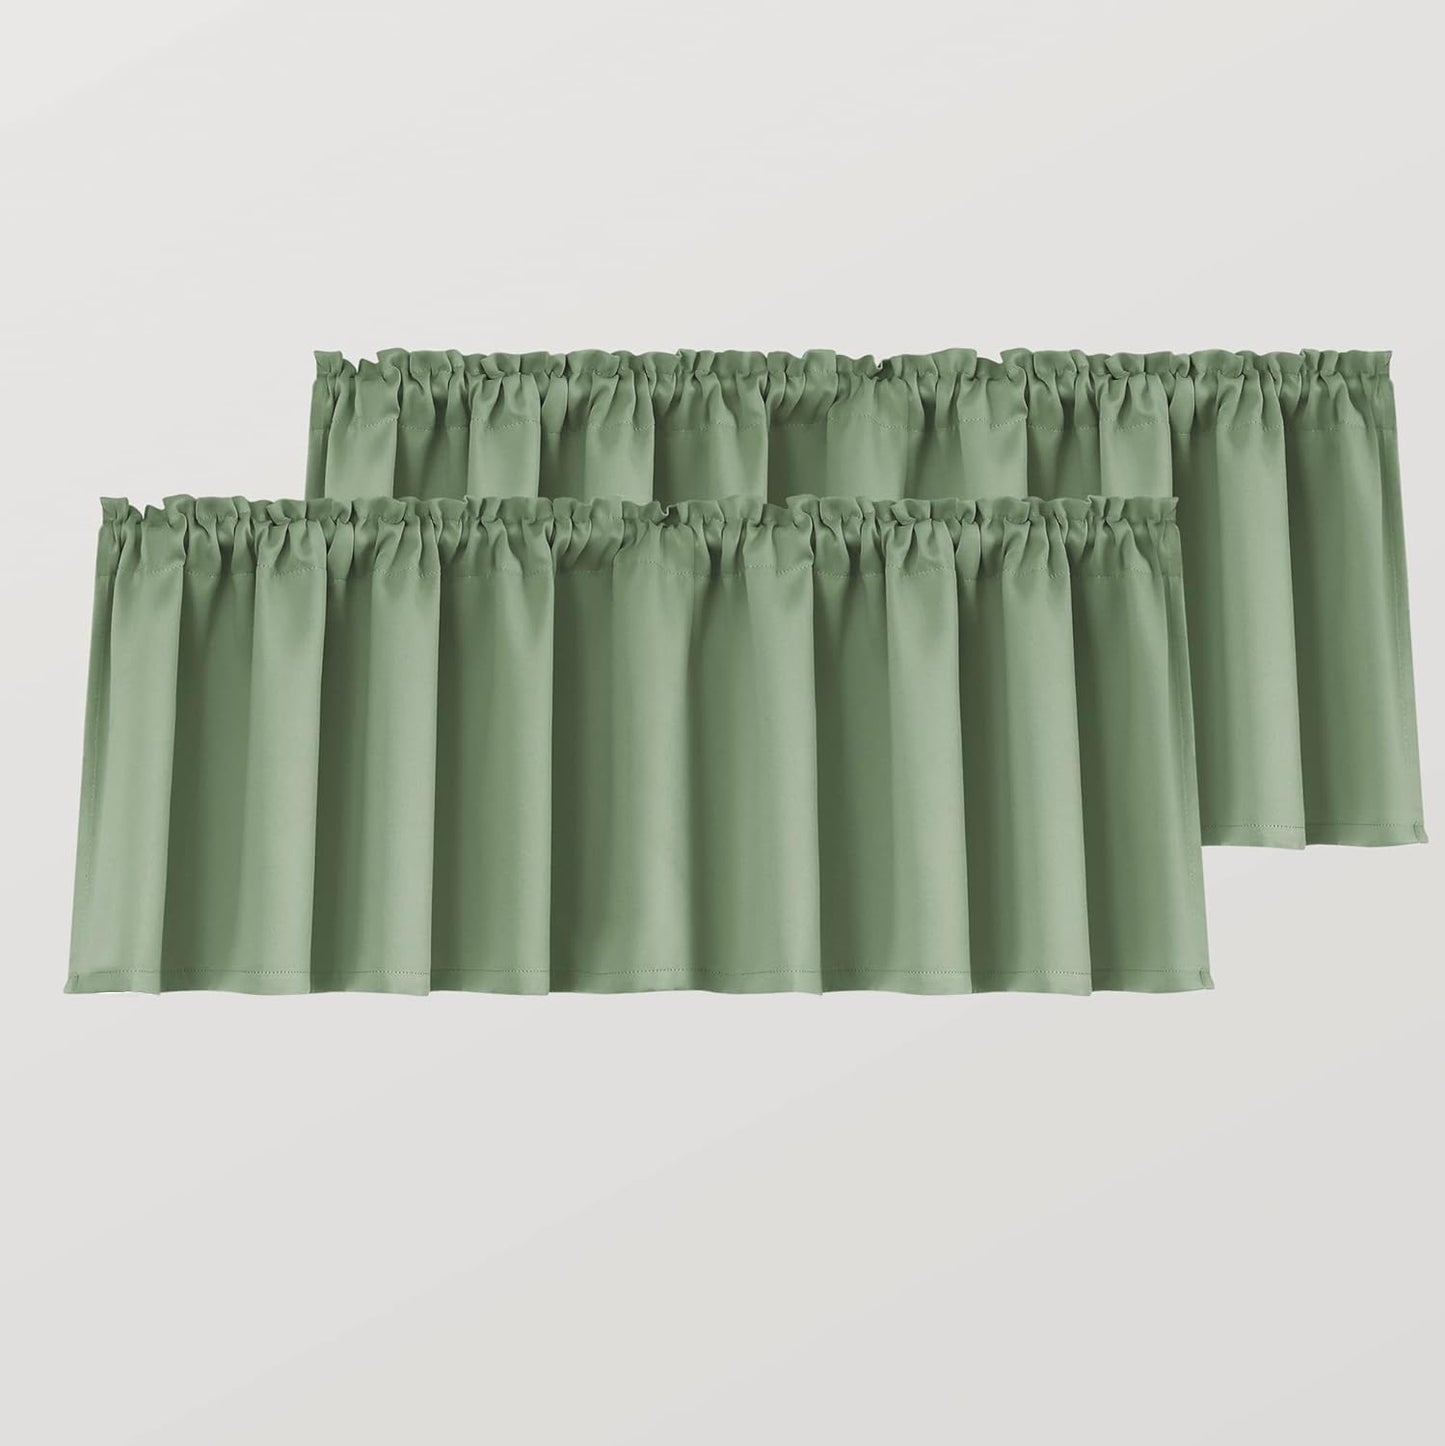 Mrs.Naturall Beige Valance Curtains for Windows 36X16 Inch Length  MRS.NATURALL TEXTILE Sage Green 36X16 